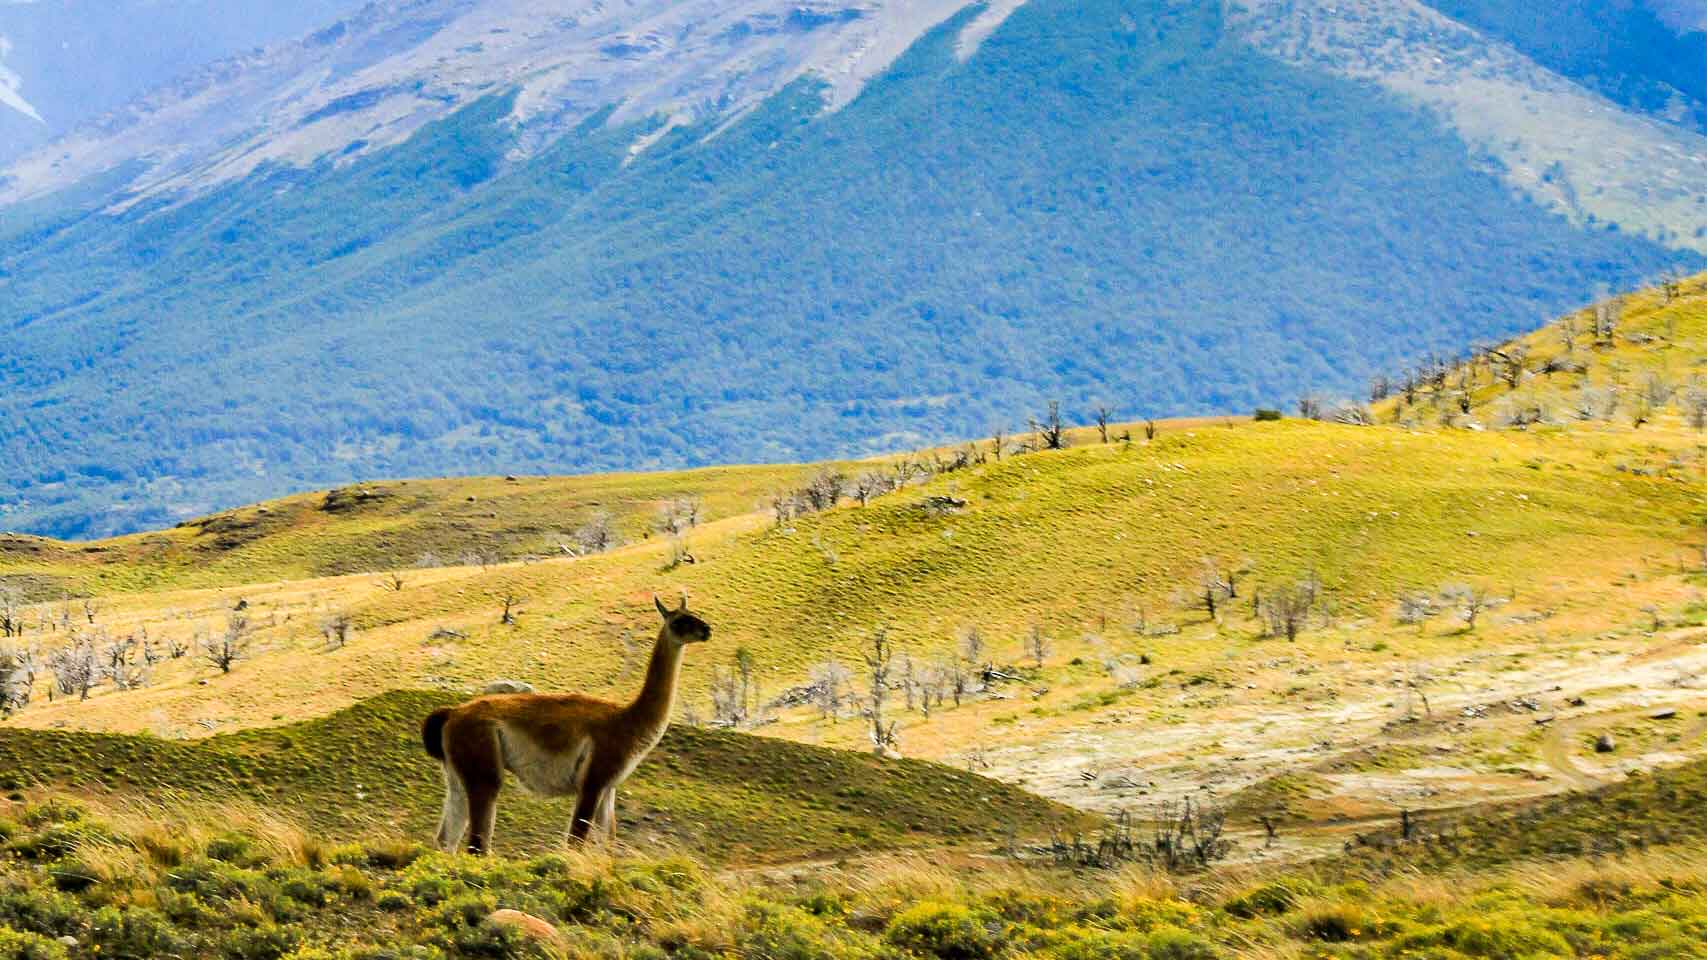 A llama standing on yellow grass covered hills looking towards the grey jagged Torres del Paine mountains in Patagonia Chile, part of the travel that inspired the creation of Asmuss clothing